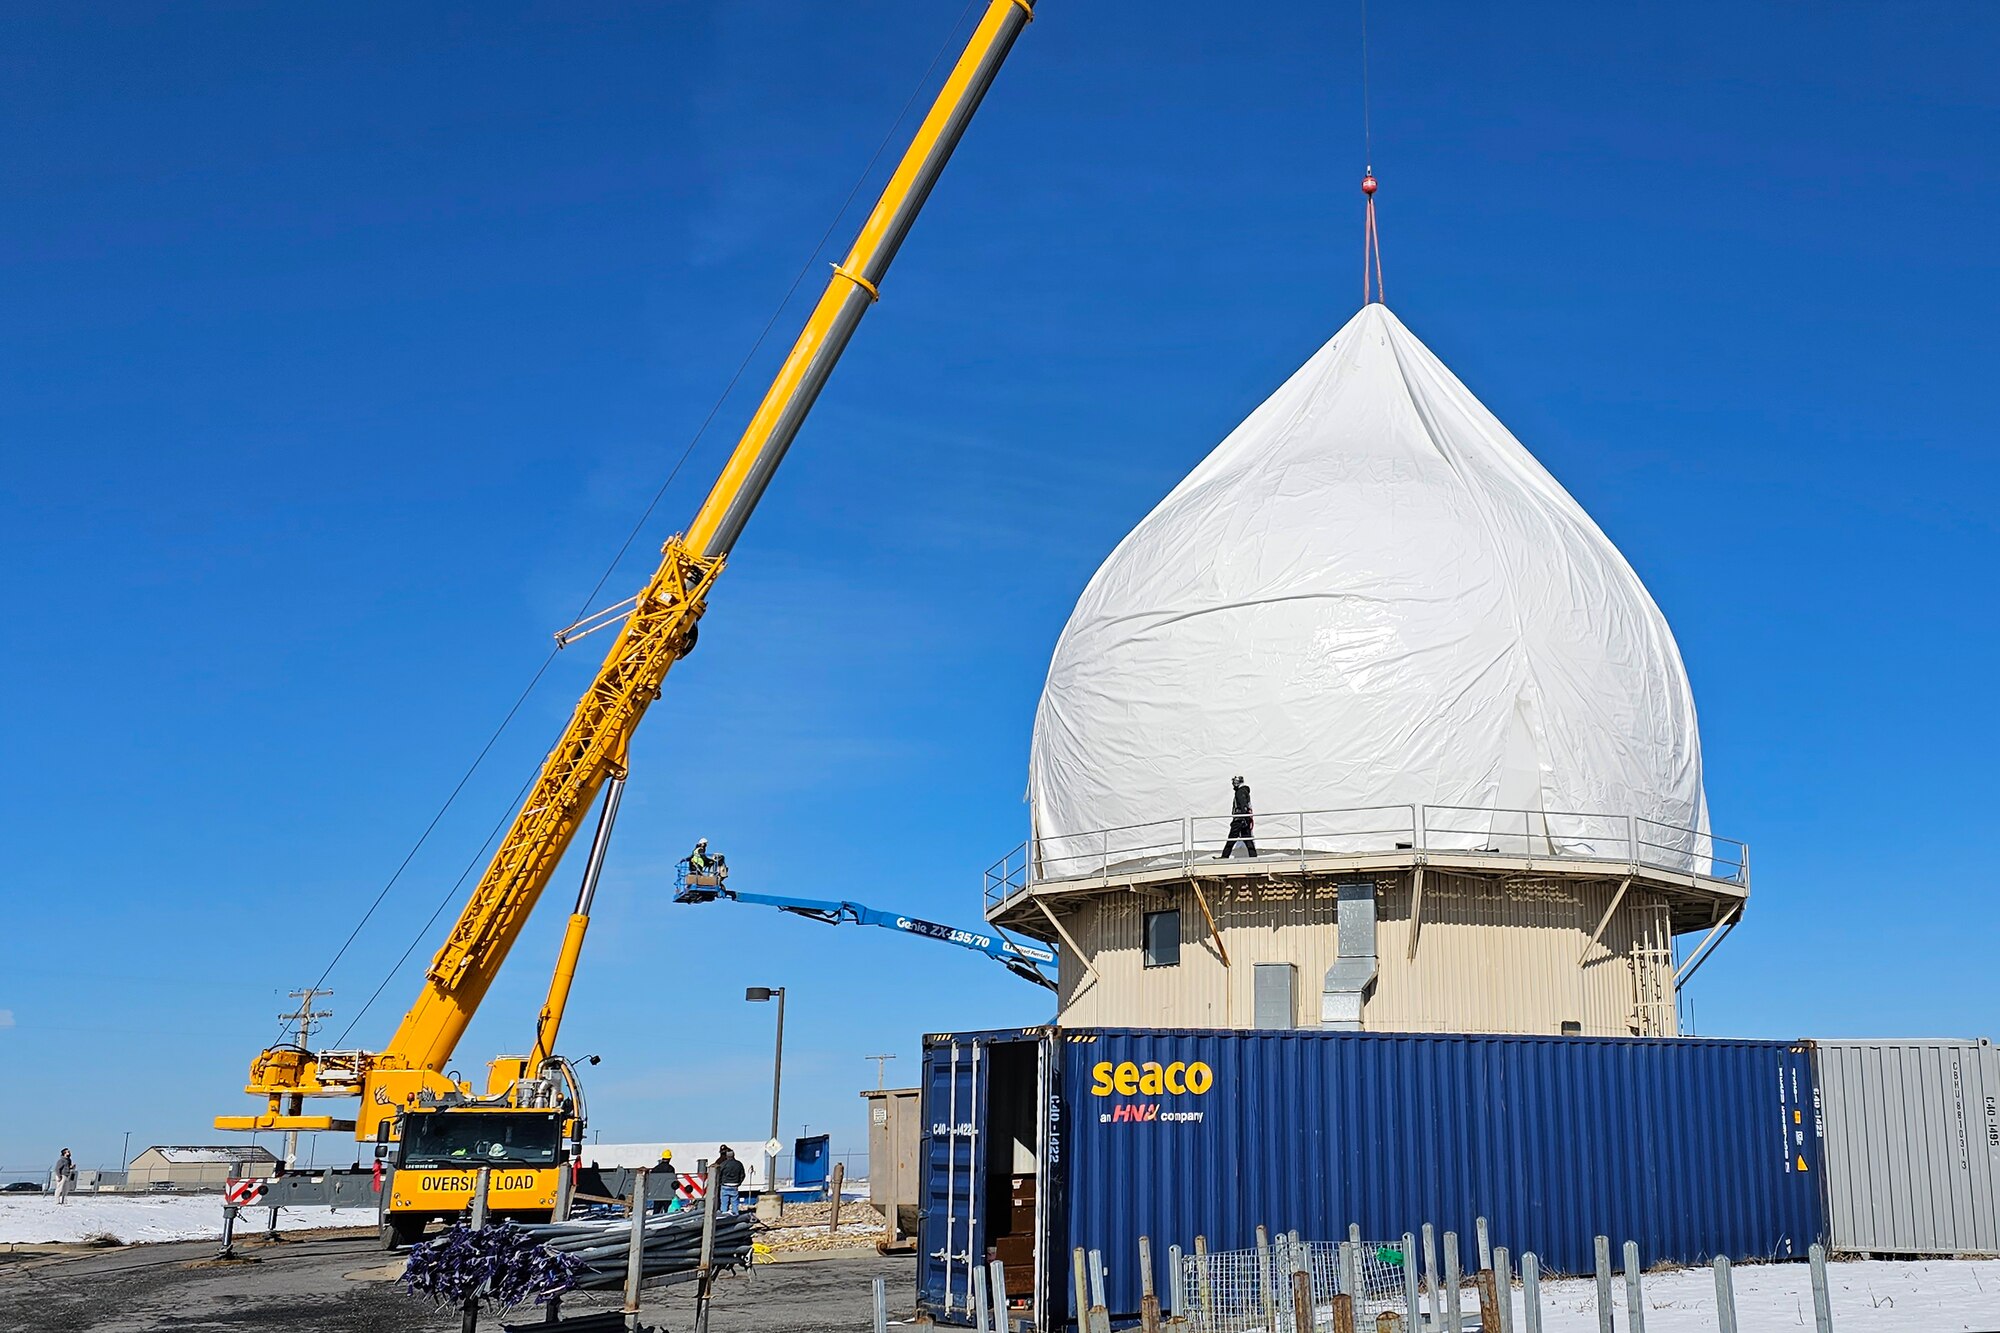 Crews deploy a newly developed temporary inflatable work enclosure over a radome structure in December 2022 at Hill Air Force Base, Utah, which can protect workers from inclement weather when doing maintenance on the radome’s exterior panels. This radome structure is a test and engineering facility for the North American’s early warning radar defense system, known as the North Warning System. (Courtesy photo)